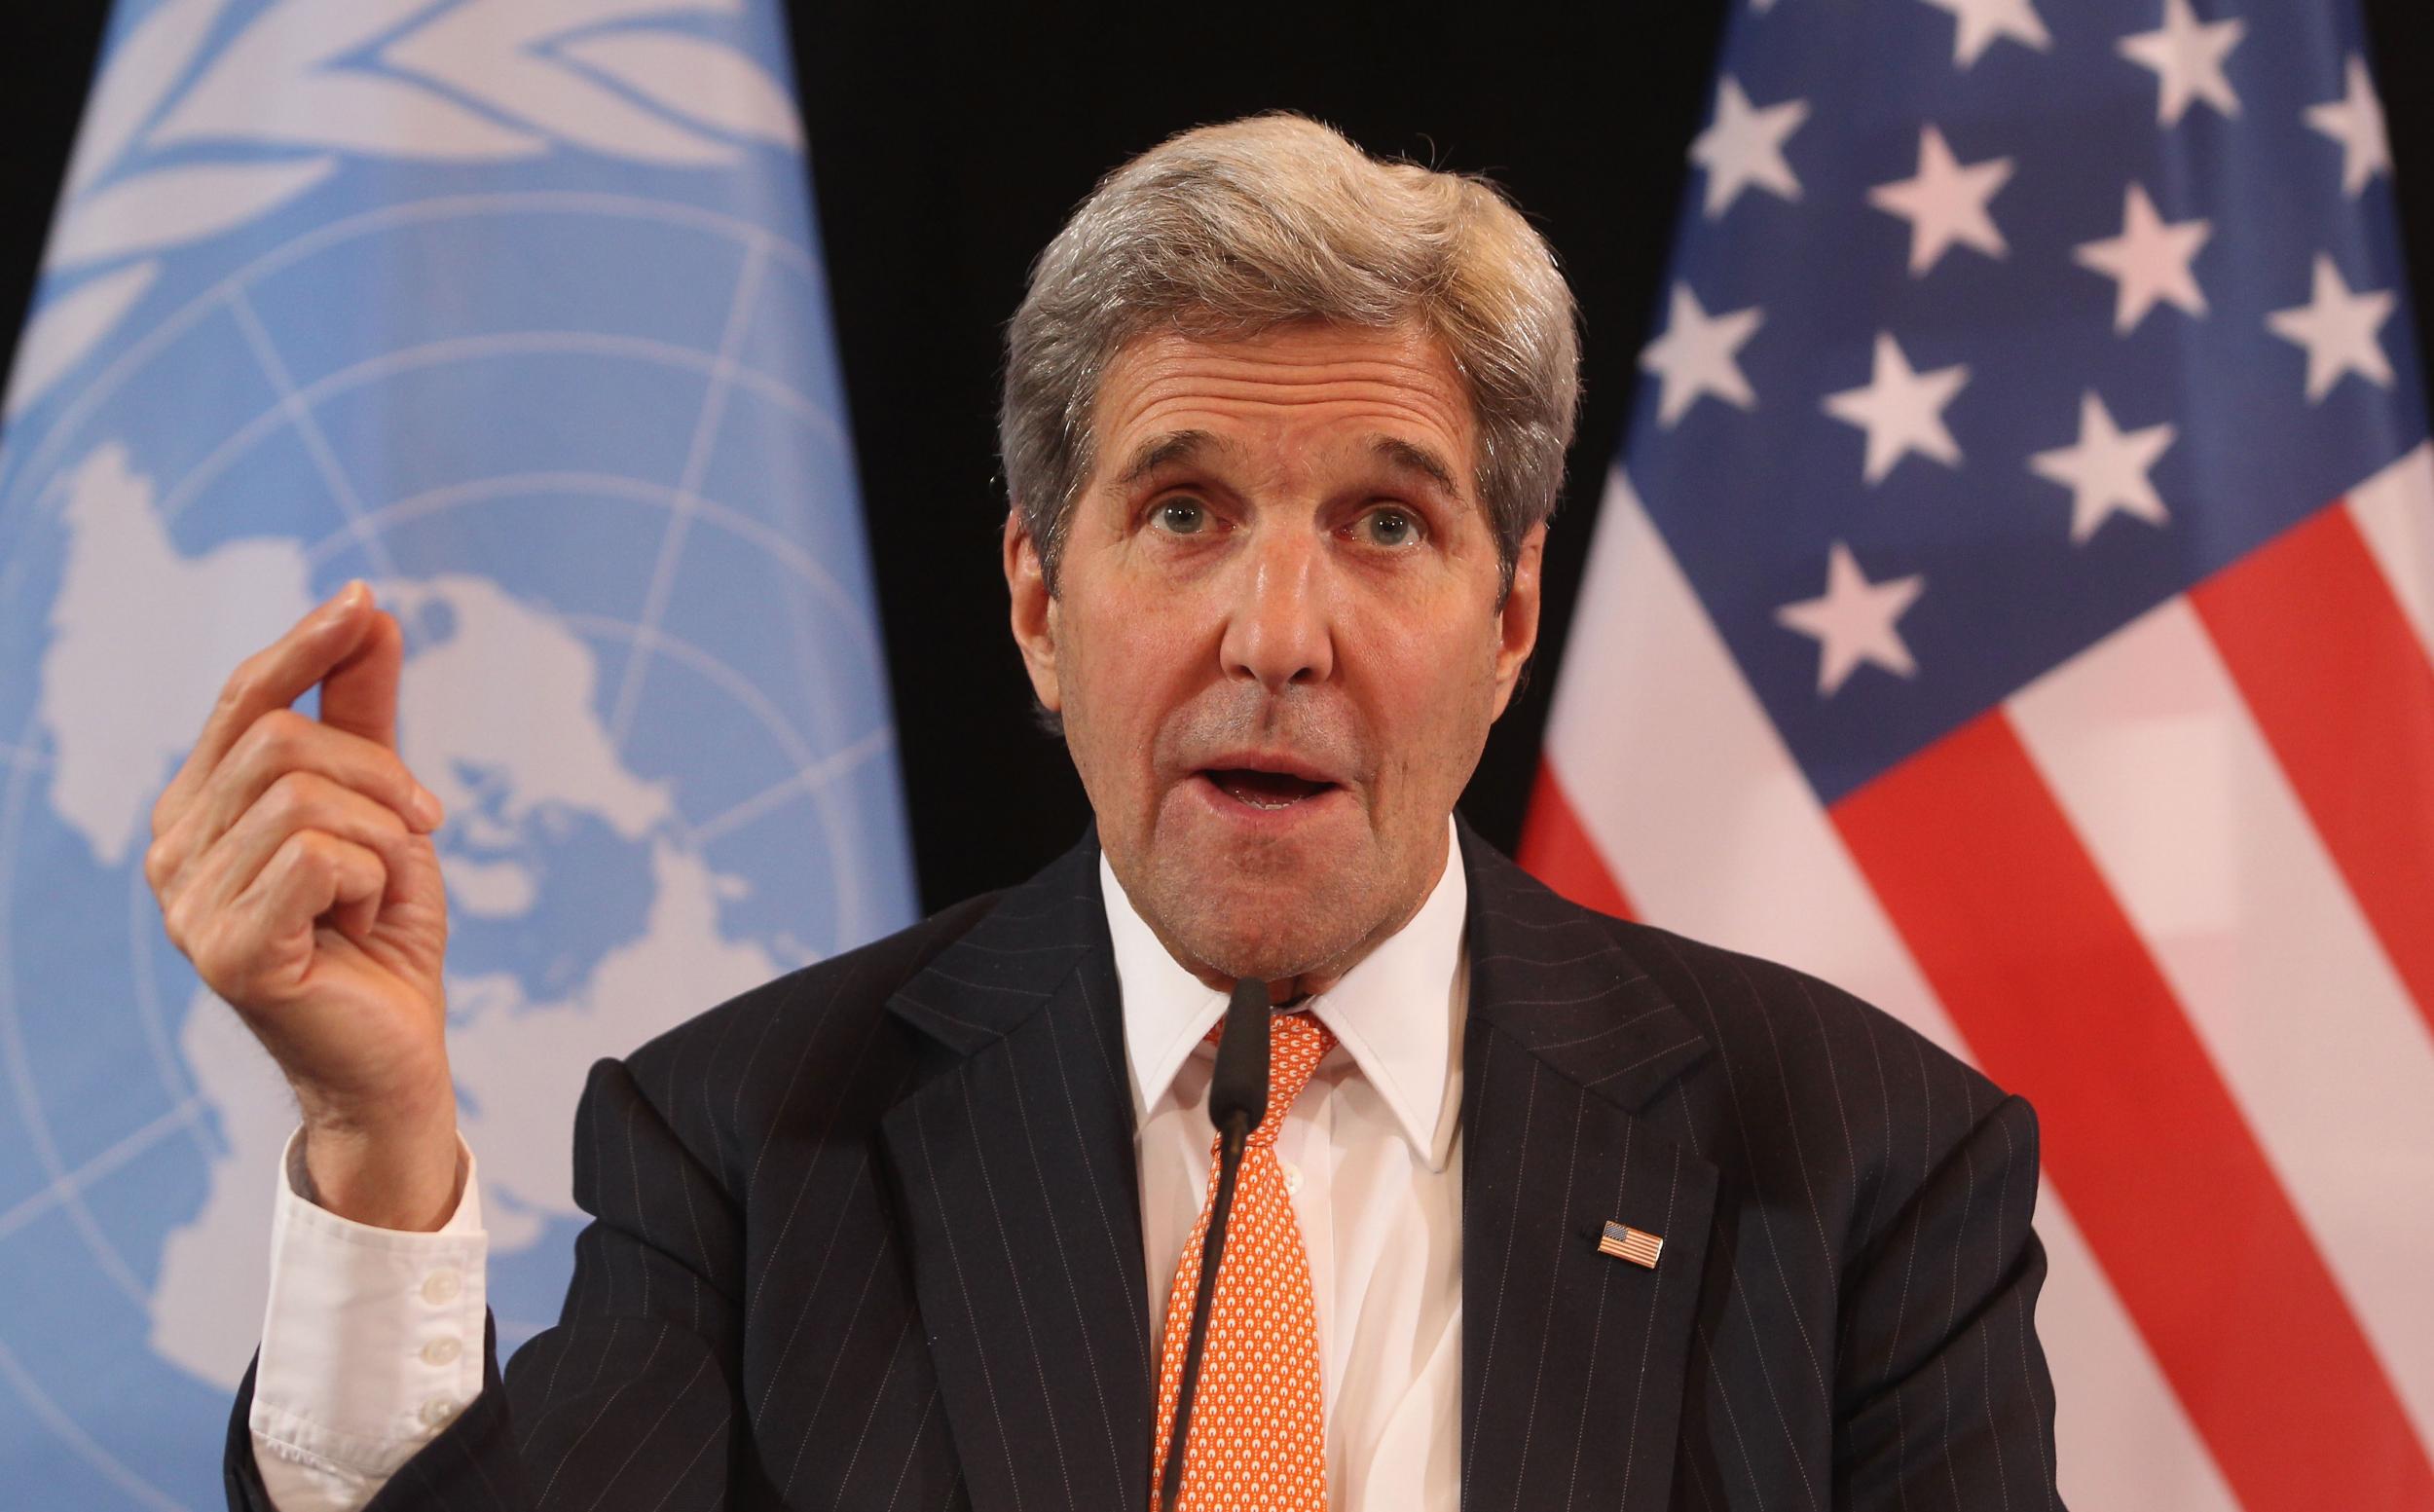 John Kerry was speaking at the annual Munich security conference